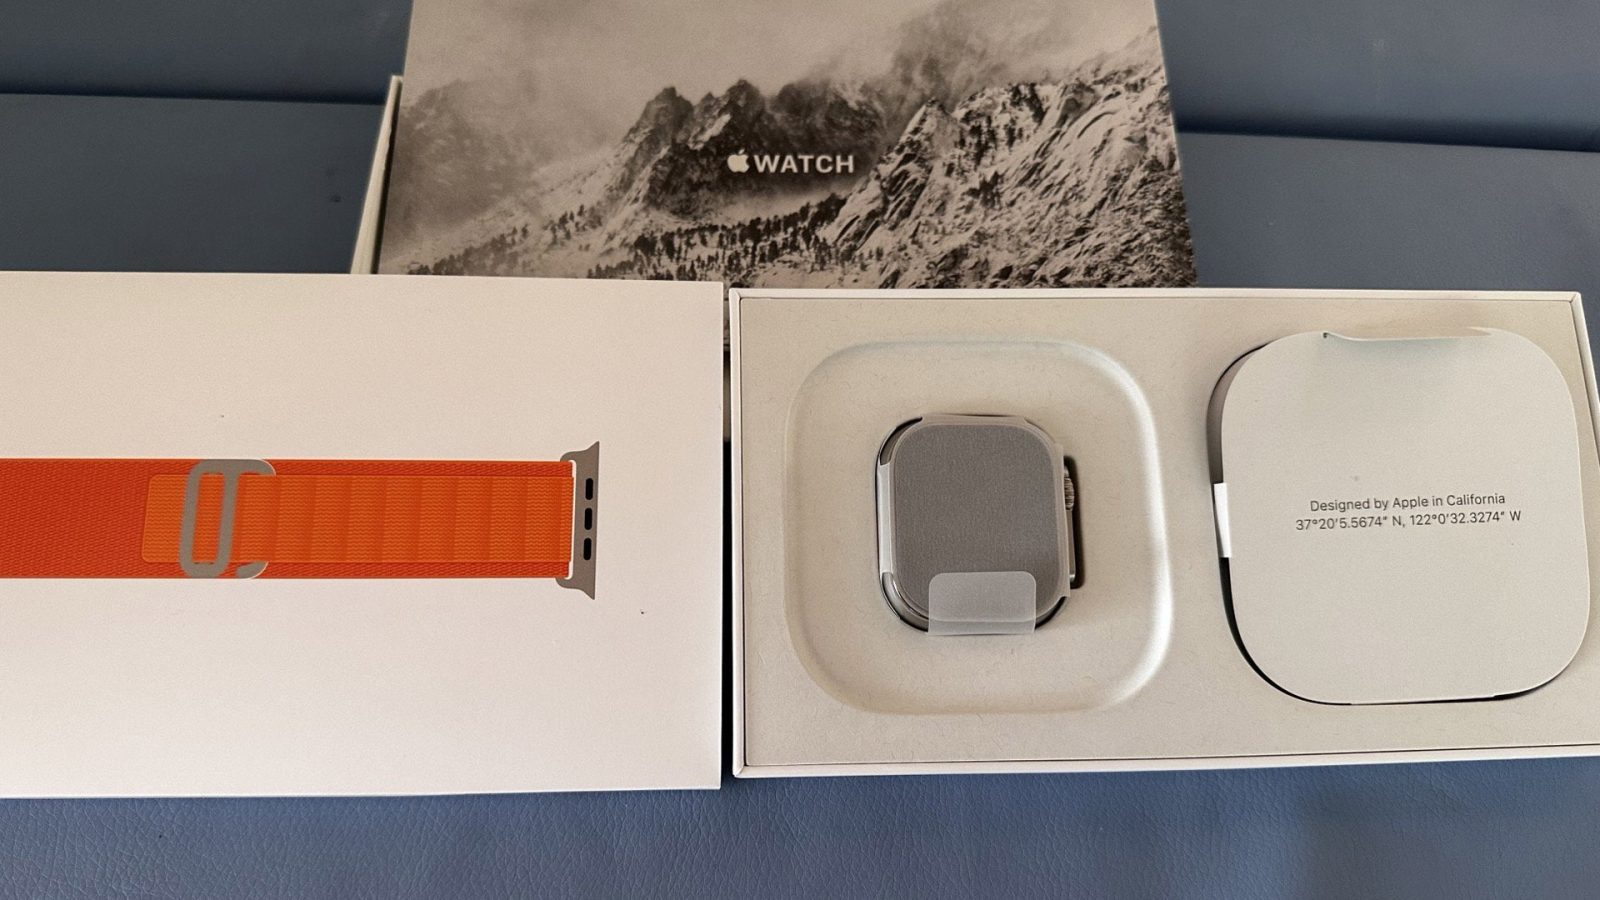 Apple Watch Ultra pre-order arrives ahead of schedule for lucky buyer